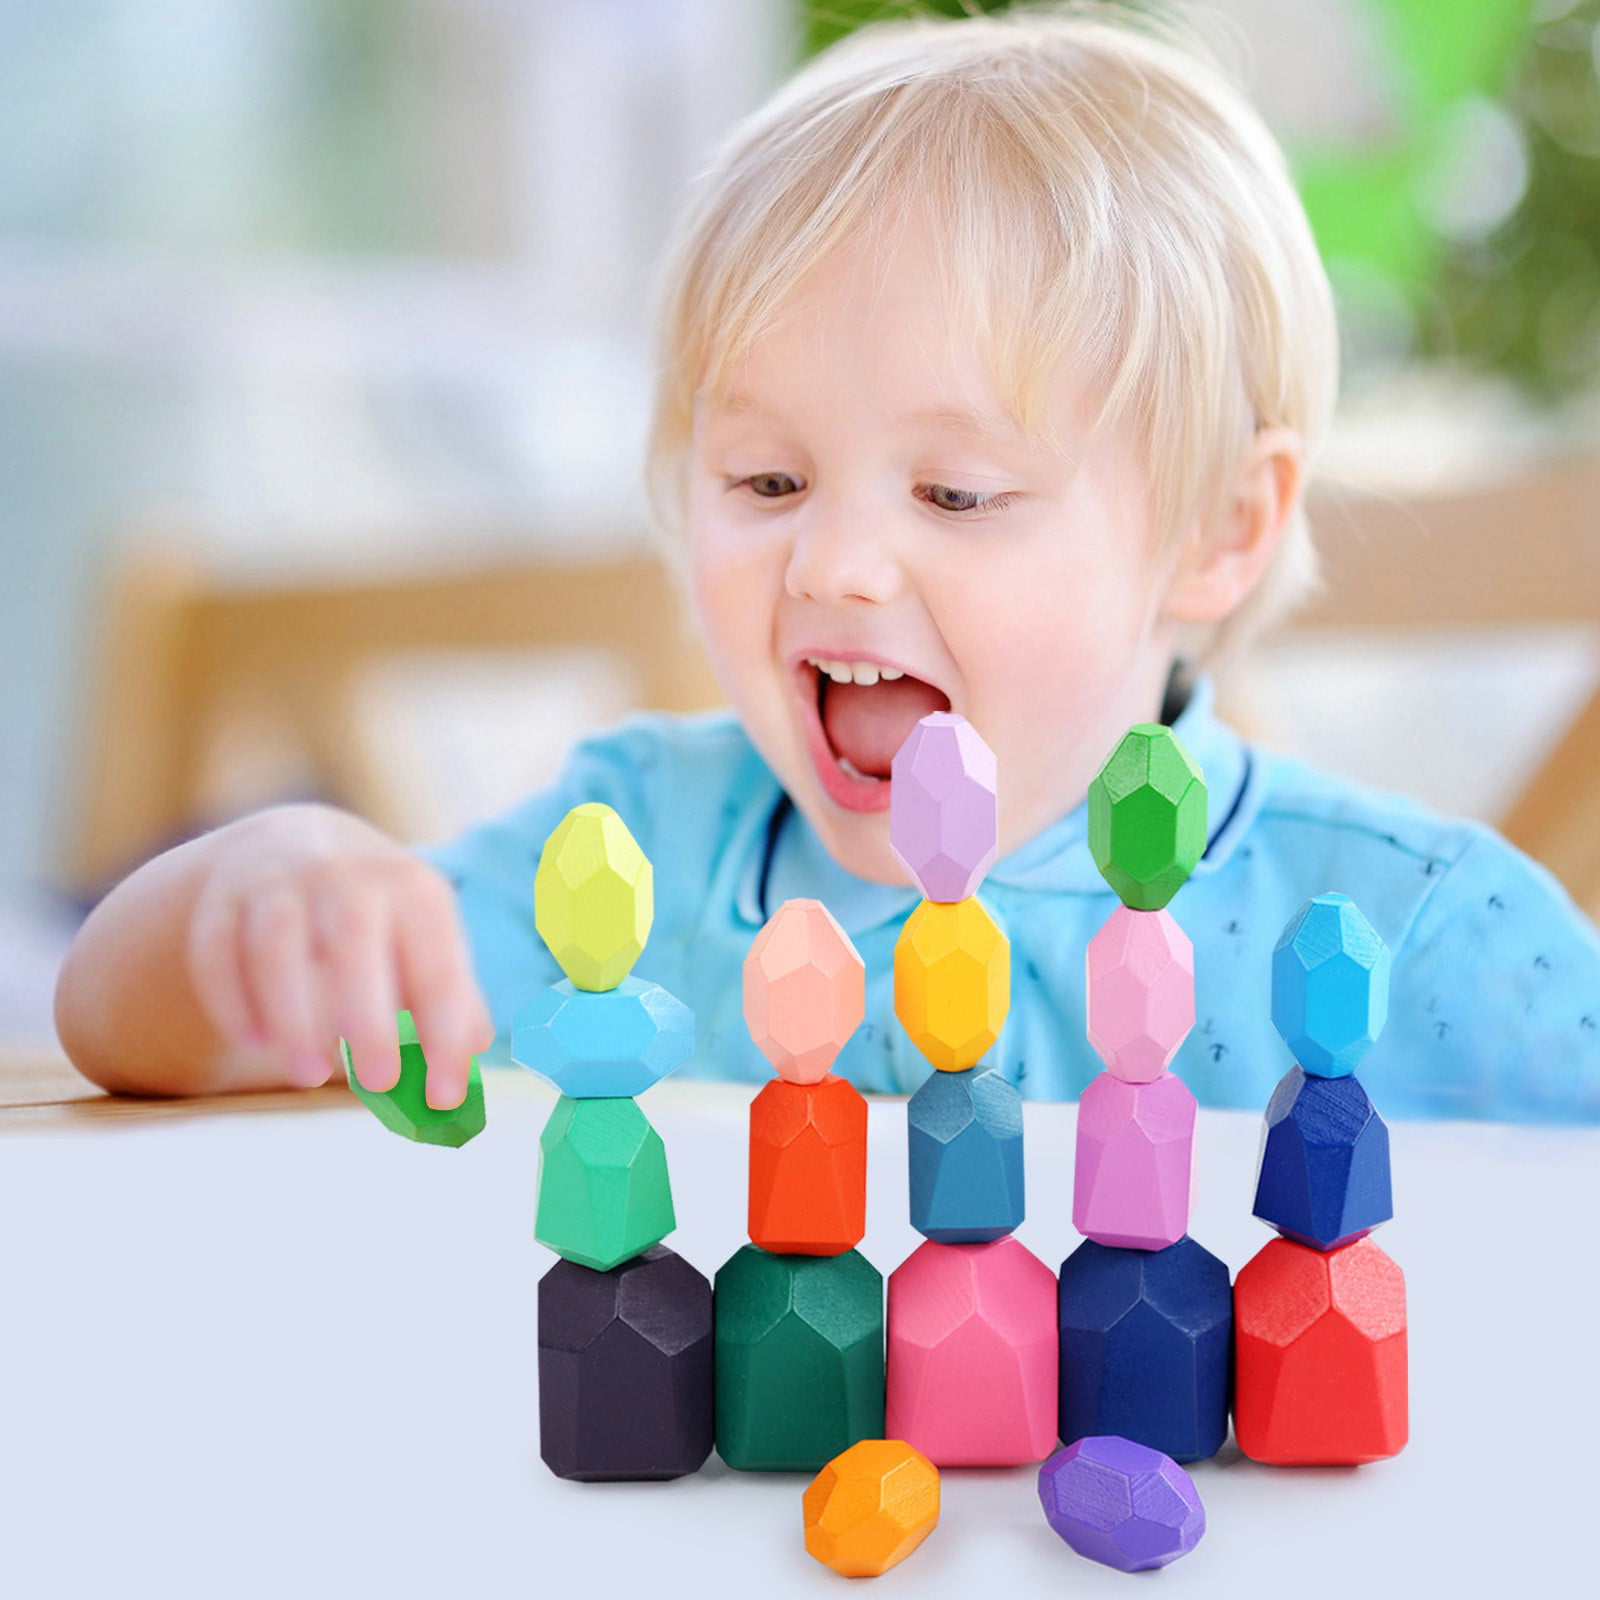 20Pcs Children Wooden Colored Stone Stacking Game Building Block Kids Toys Gift 